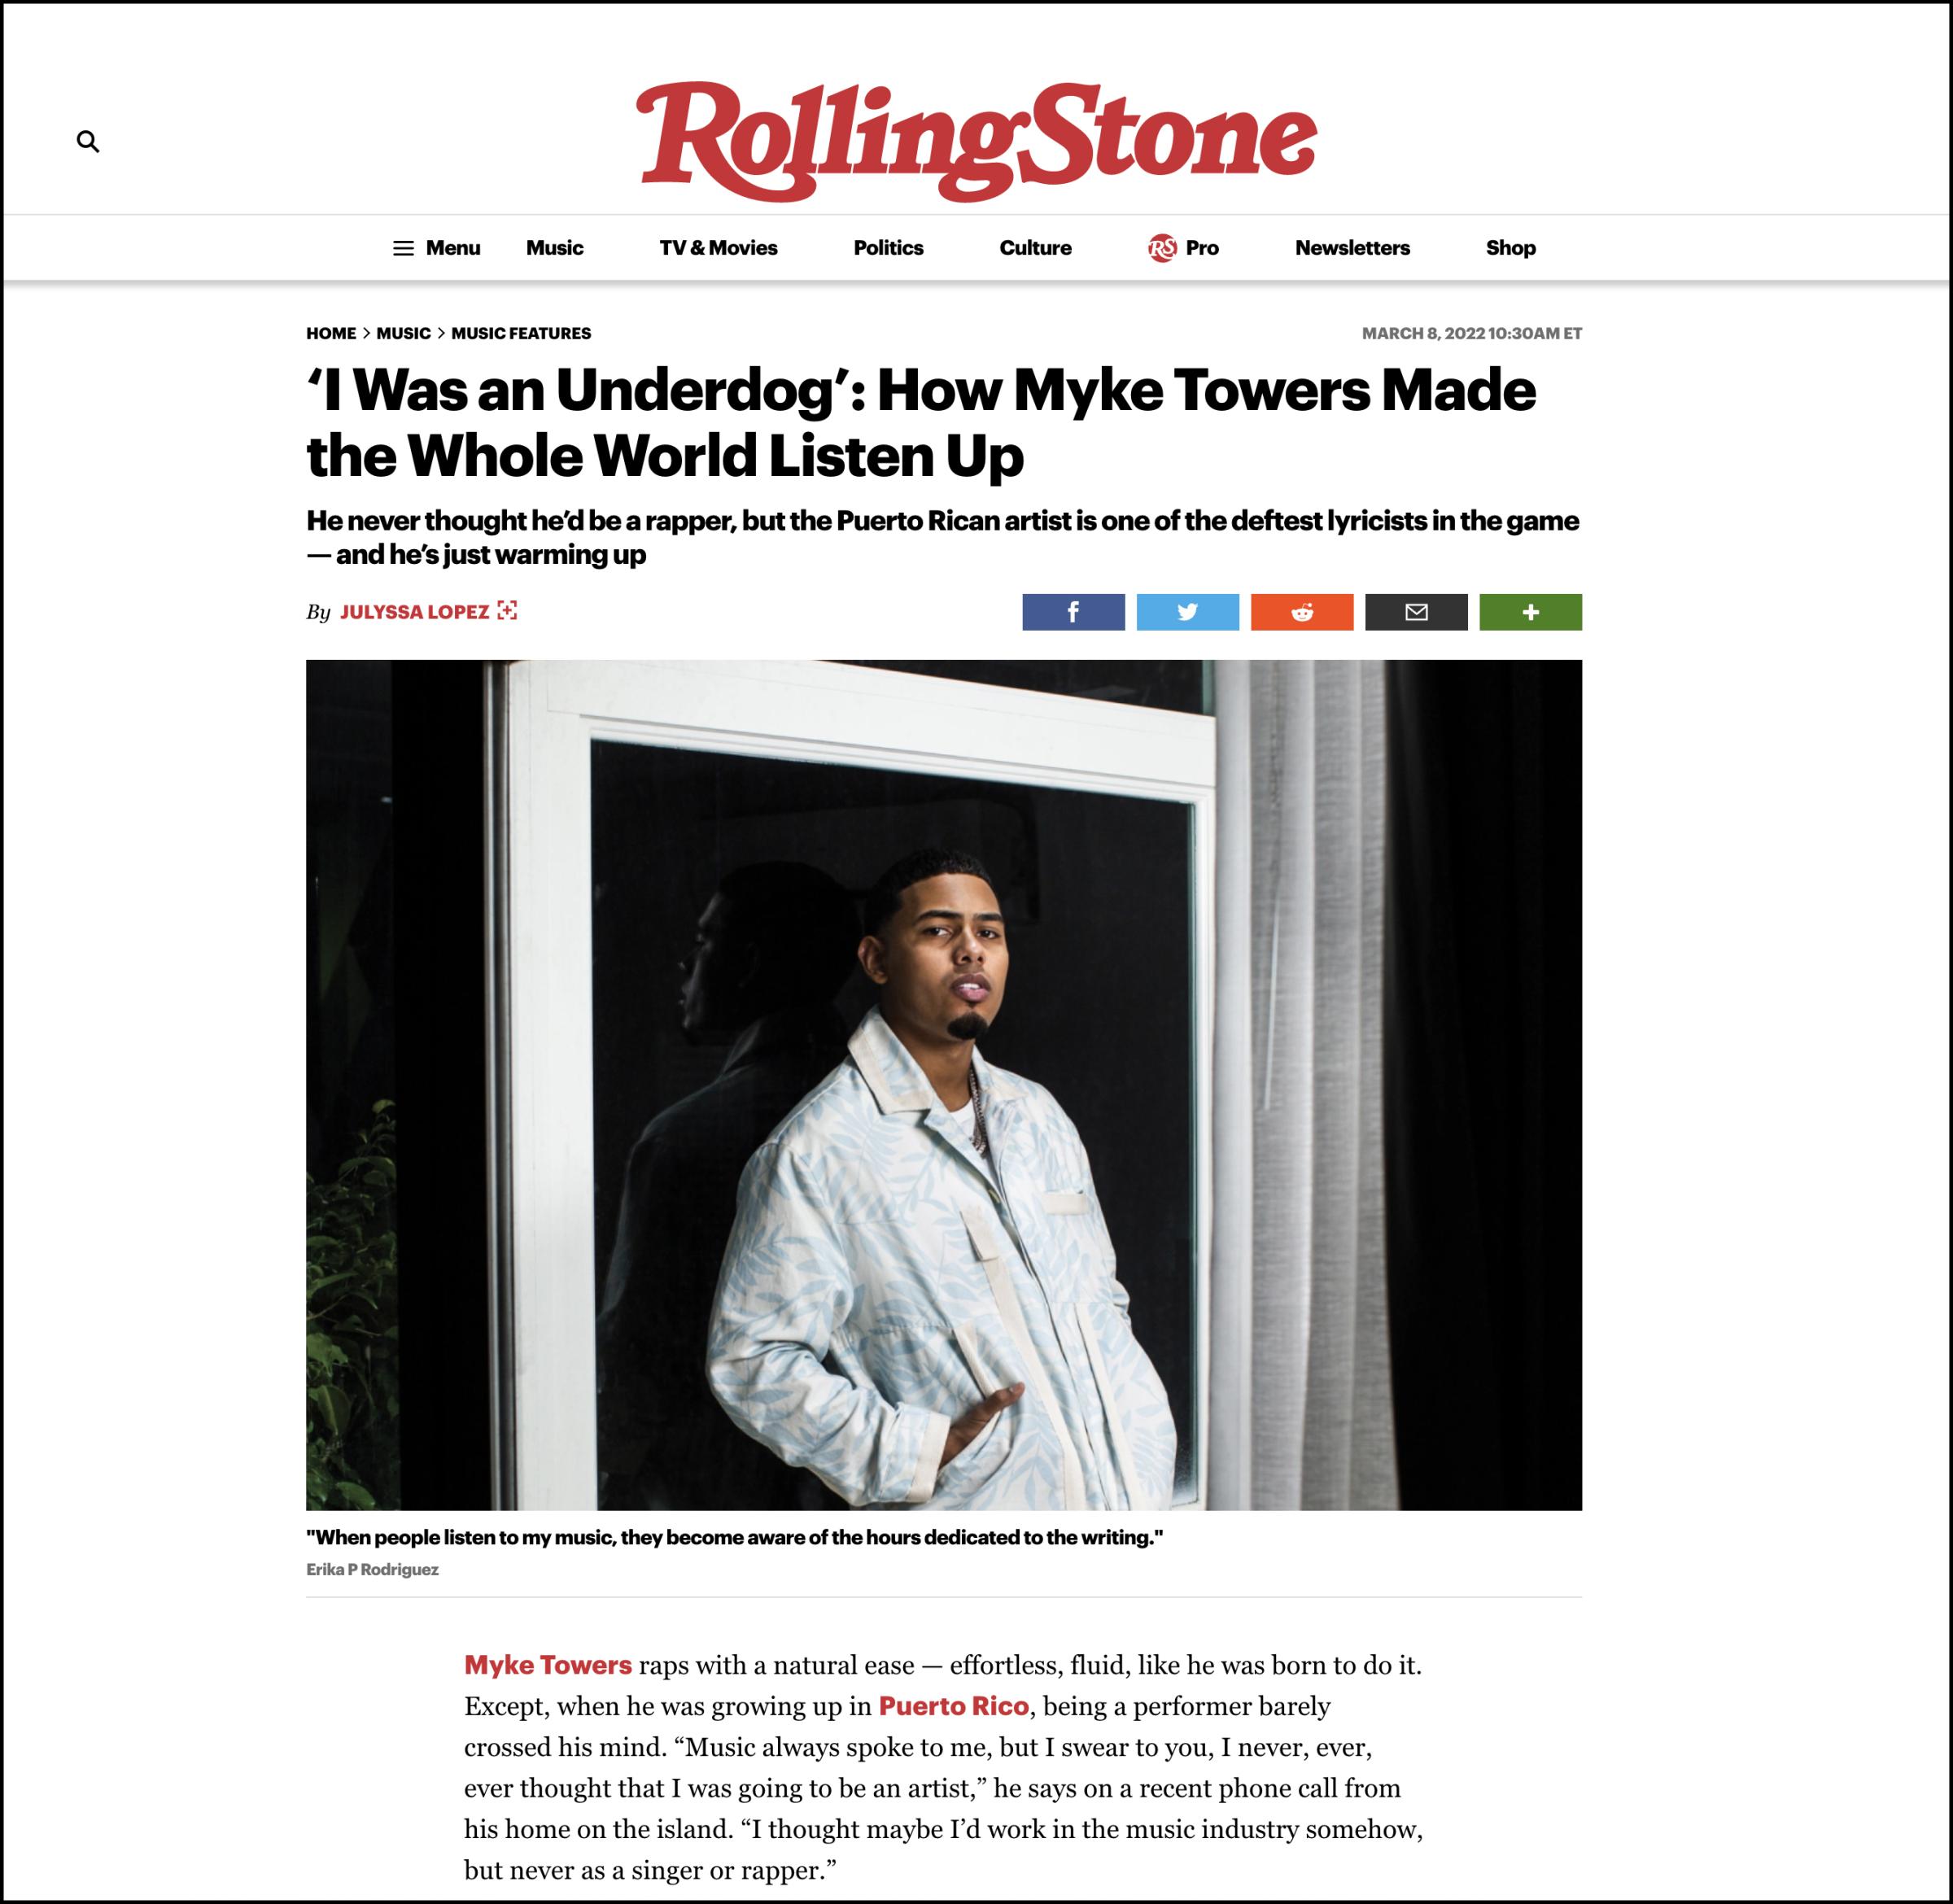 For Rolling Stone: Myke Towers